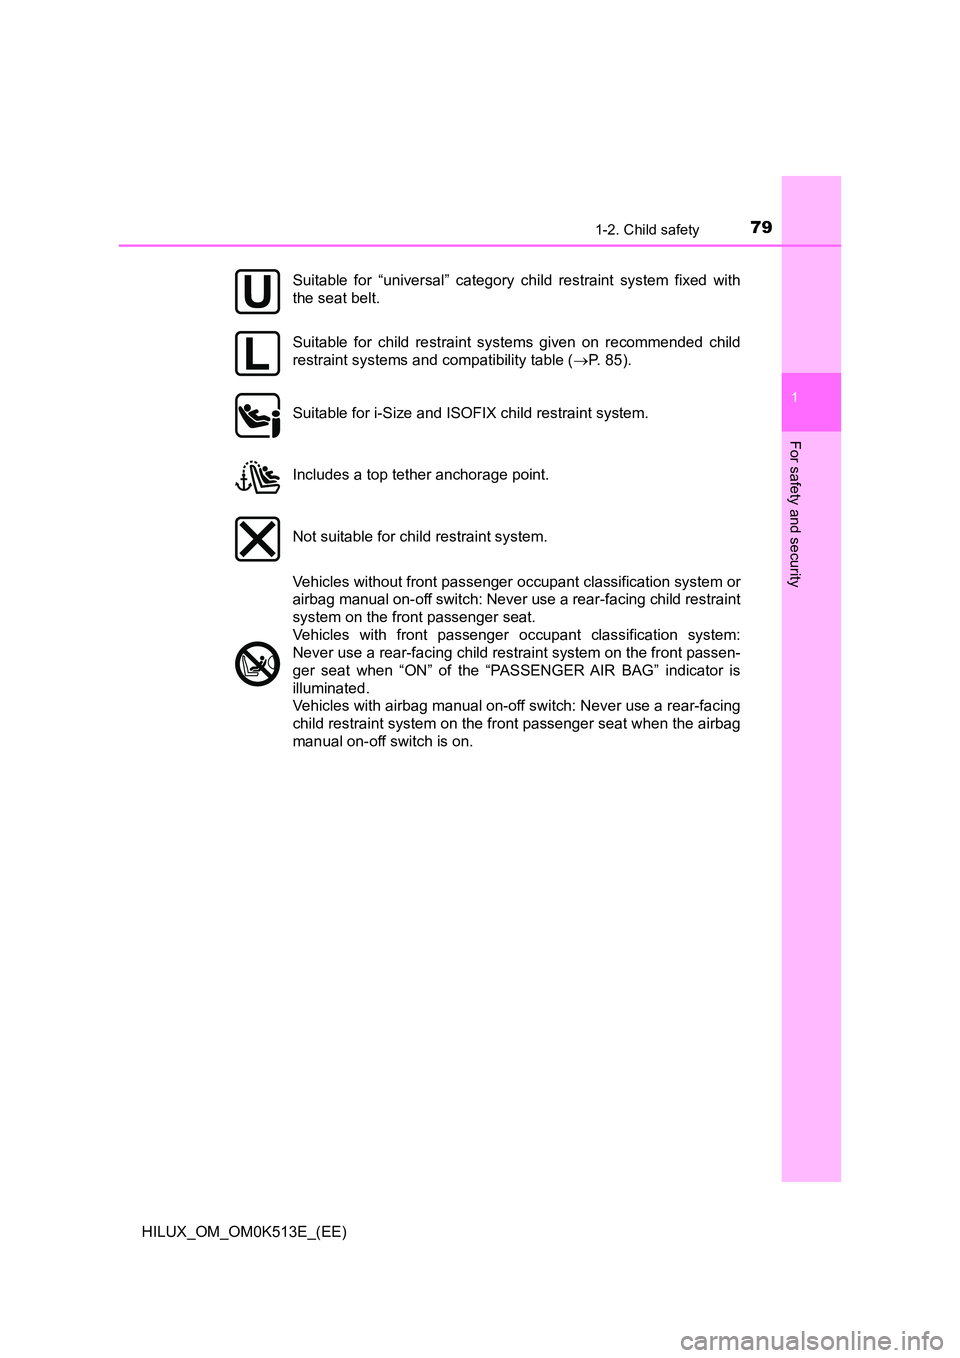 TOYOTA HILUX 2021  Owners Manual (in English) 791-2. Child safety
1
HILUX_OM_OM0K513E_(EE)
For safety and security
Suitable for “universal” category child restraint system fixed with 
the seat belt.
Suitable for child restraint systems given 